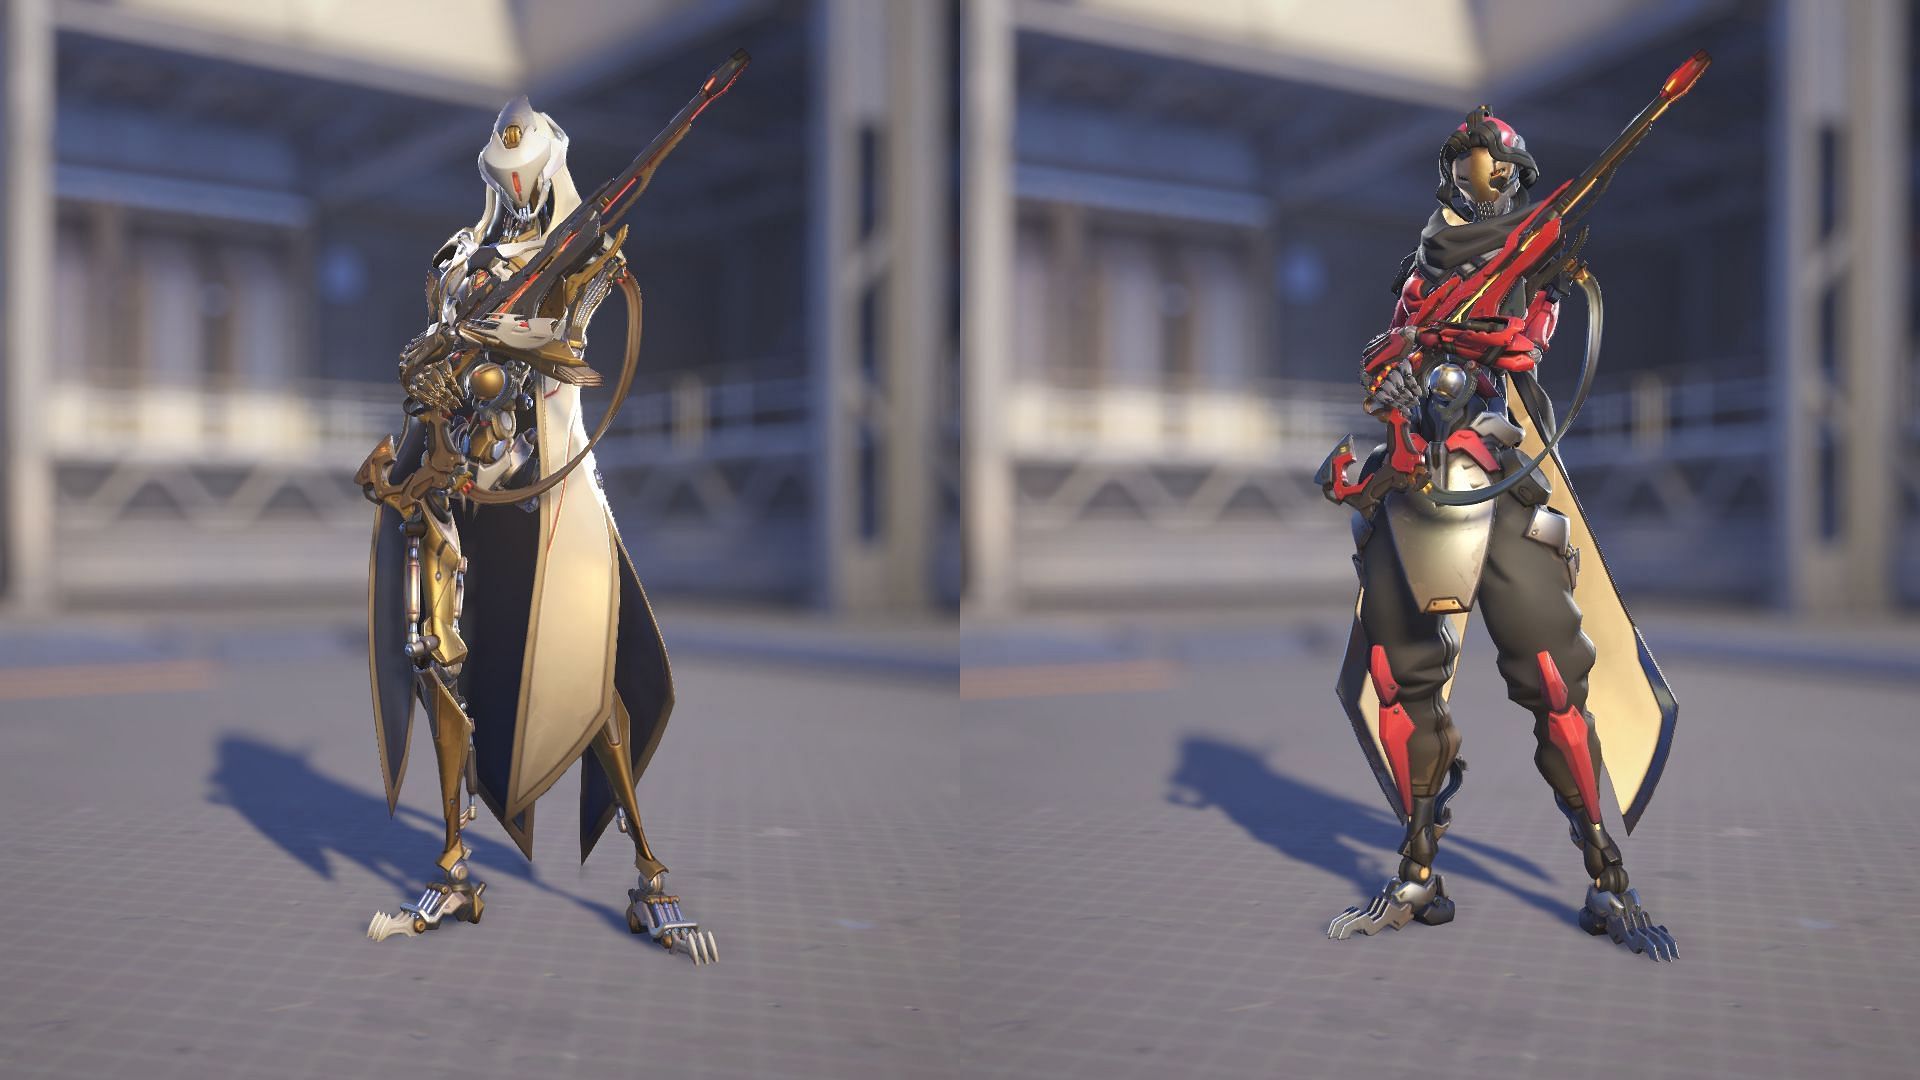 All customization options for Mythic Adventurer Tracer skin in